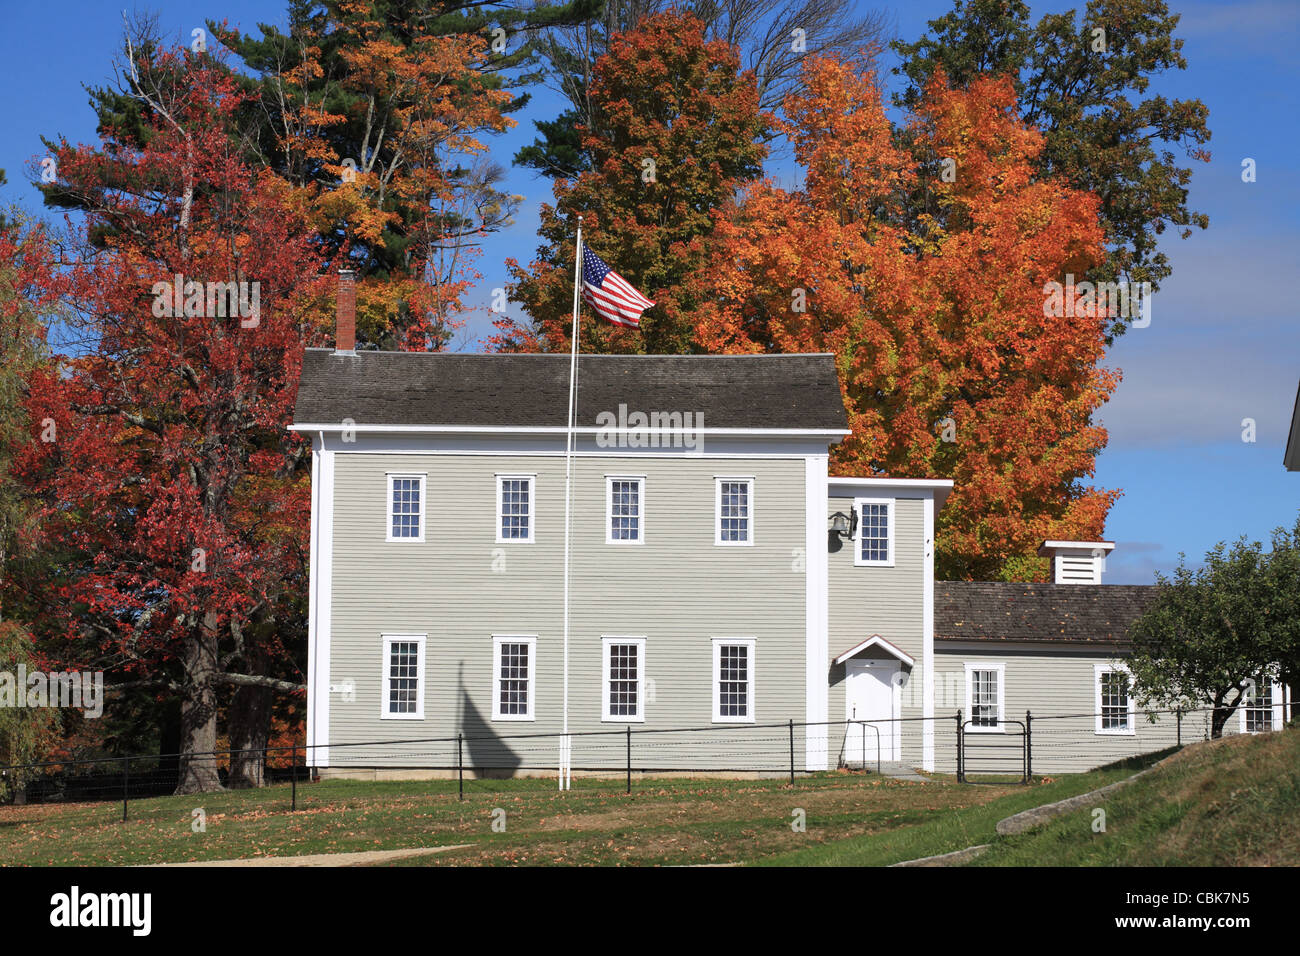 The old school house Canterbury Shaker Village, New Hampshire, USA Stock Photo